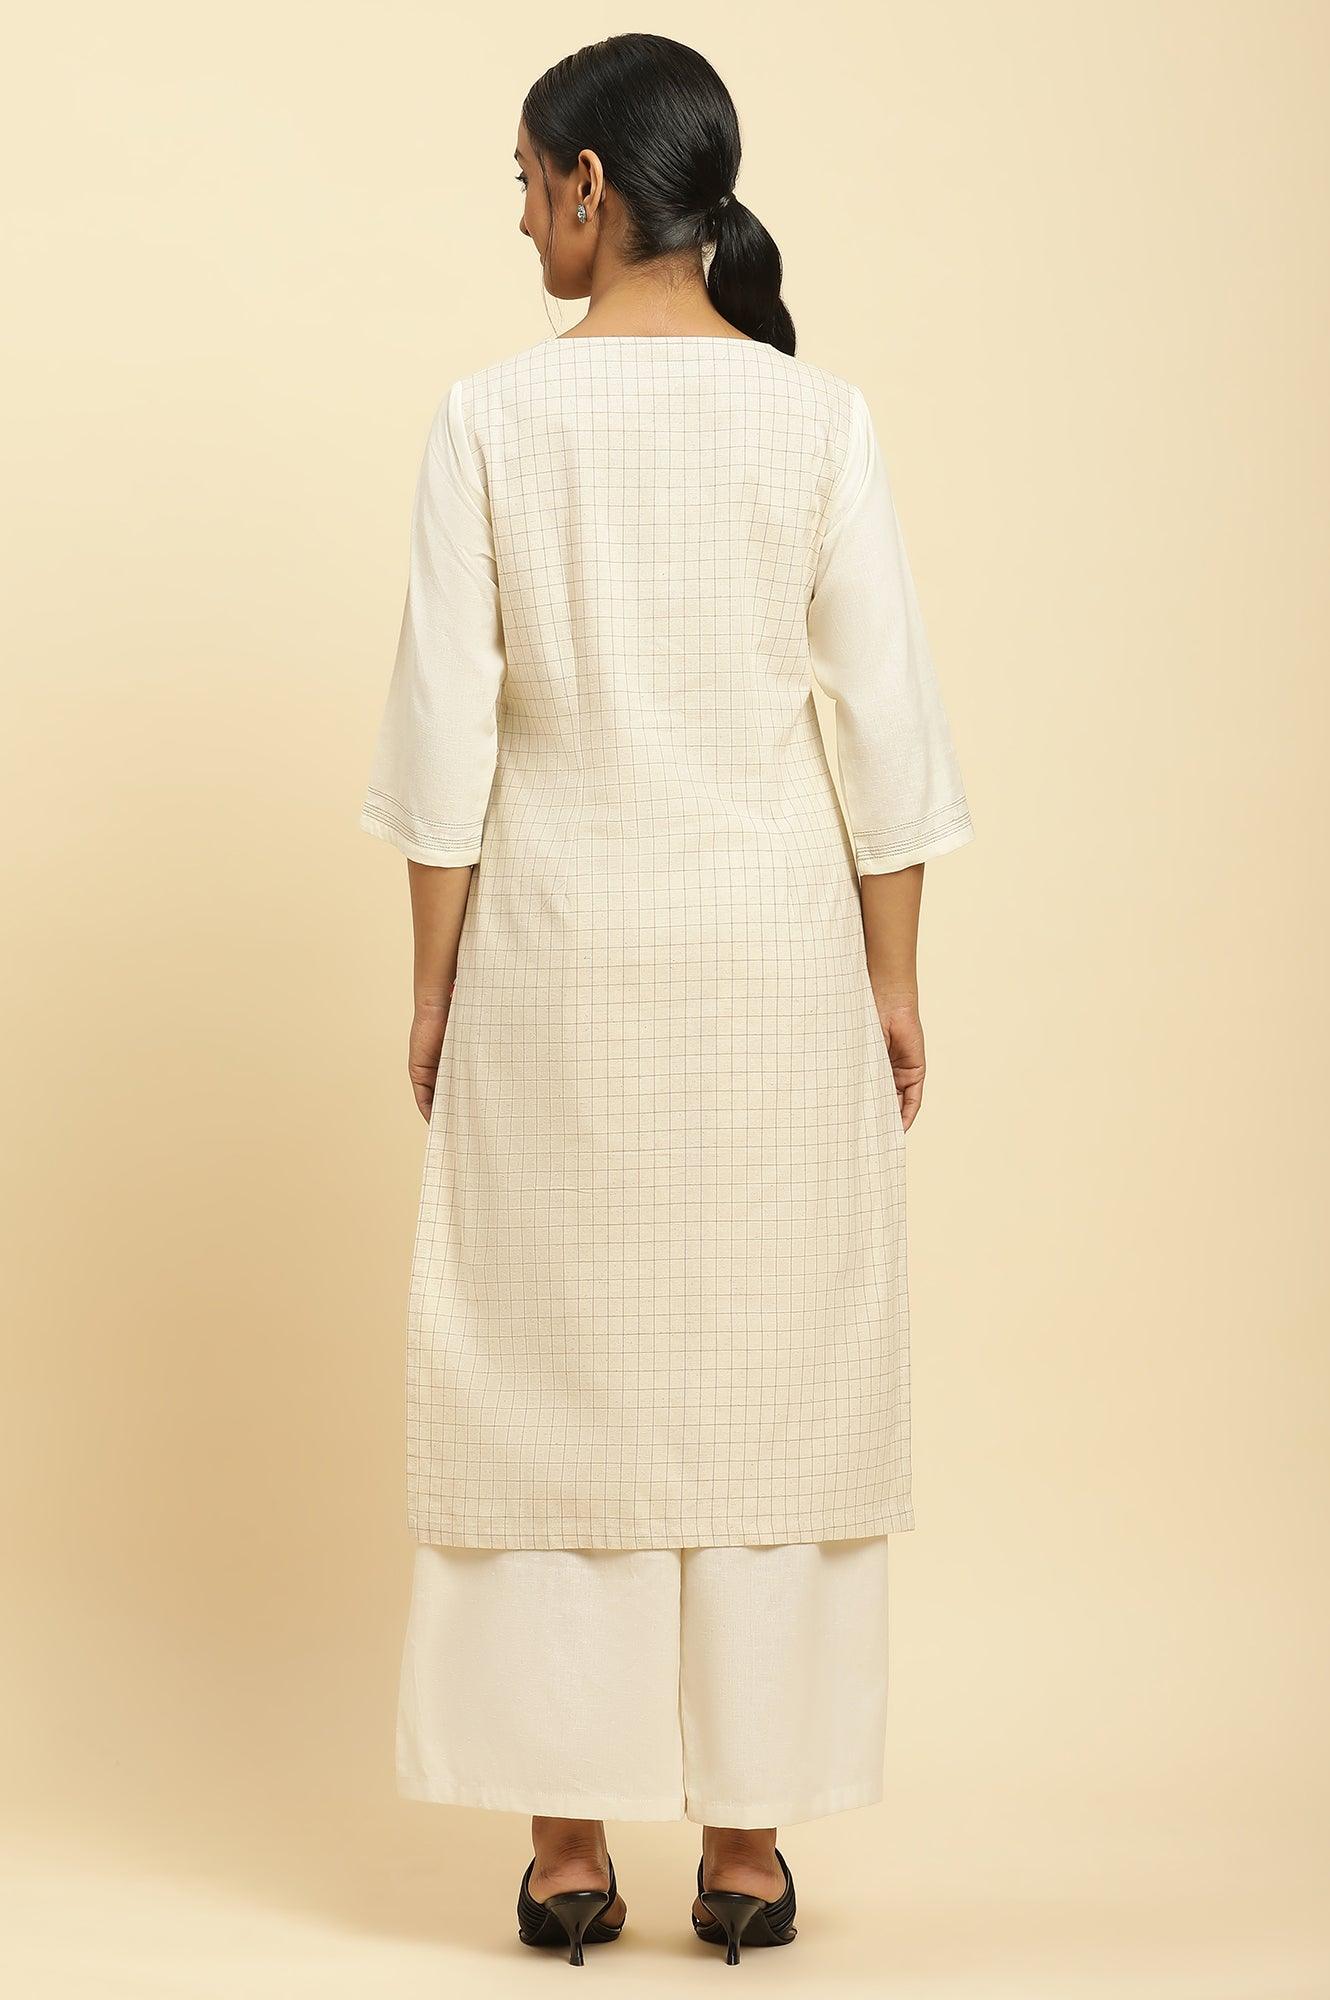 Off White Thread Embroidered And Side Stripe Kurta And Pants Set - wforwoman